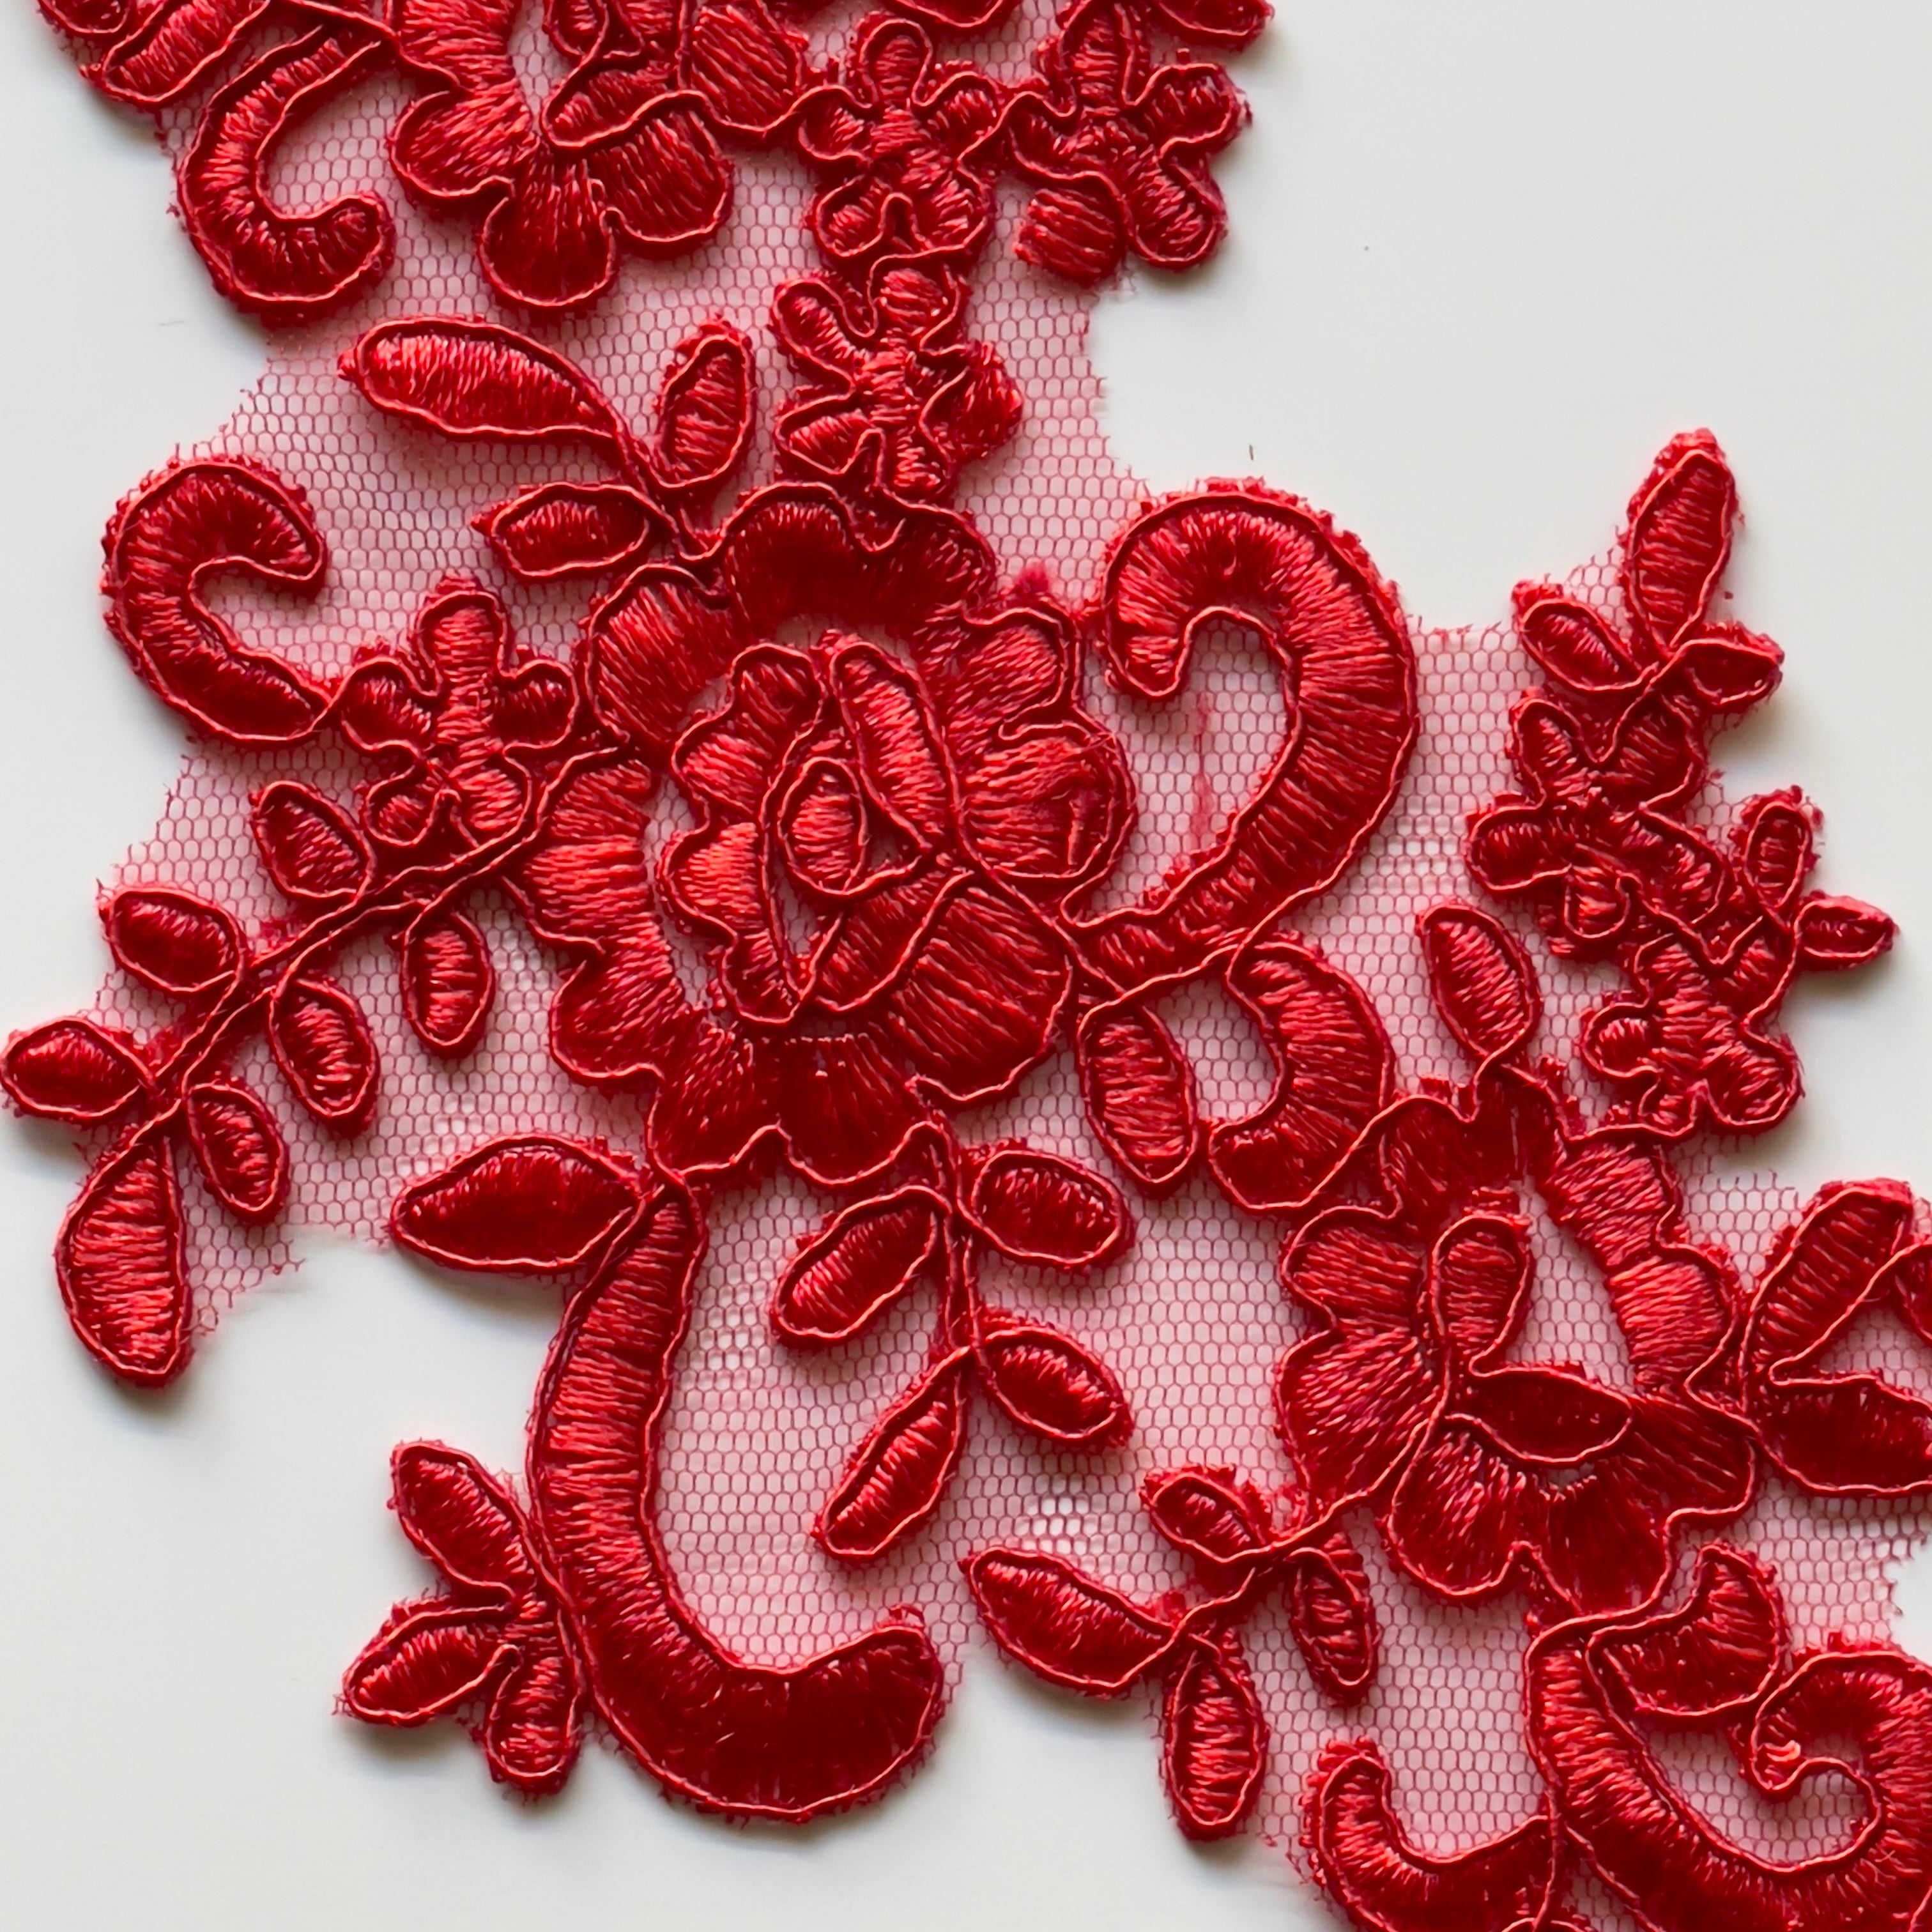 Close up of red floral applique embroidered onto a red net backing.  The applique is laying flat on a white background.